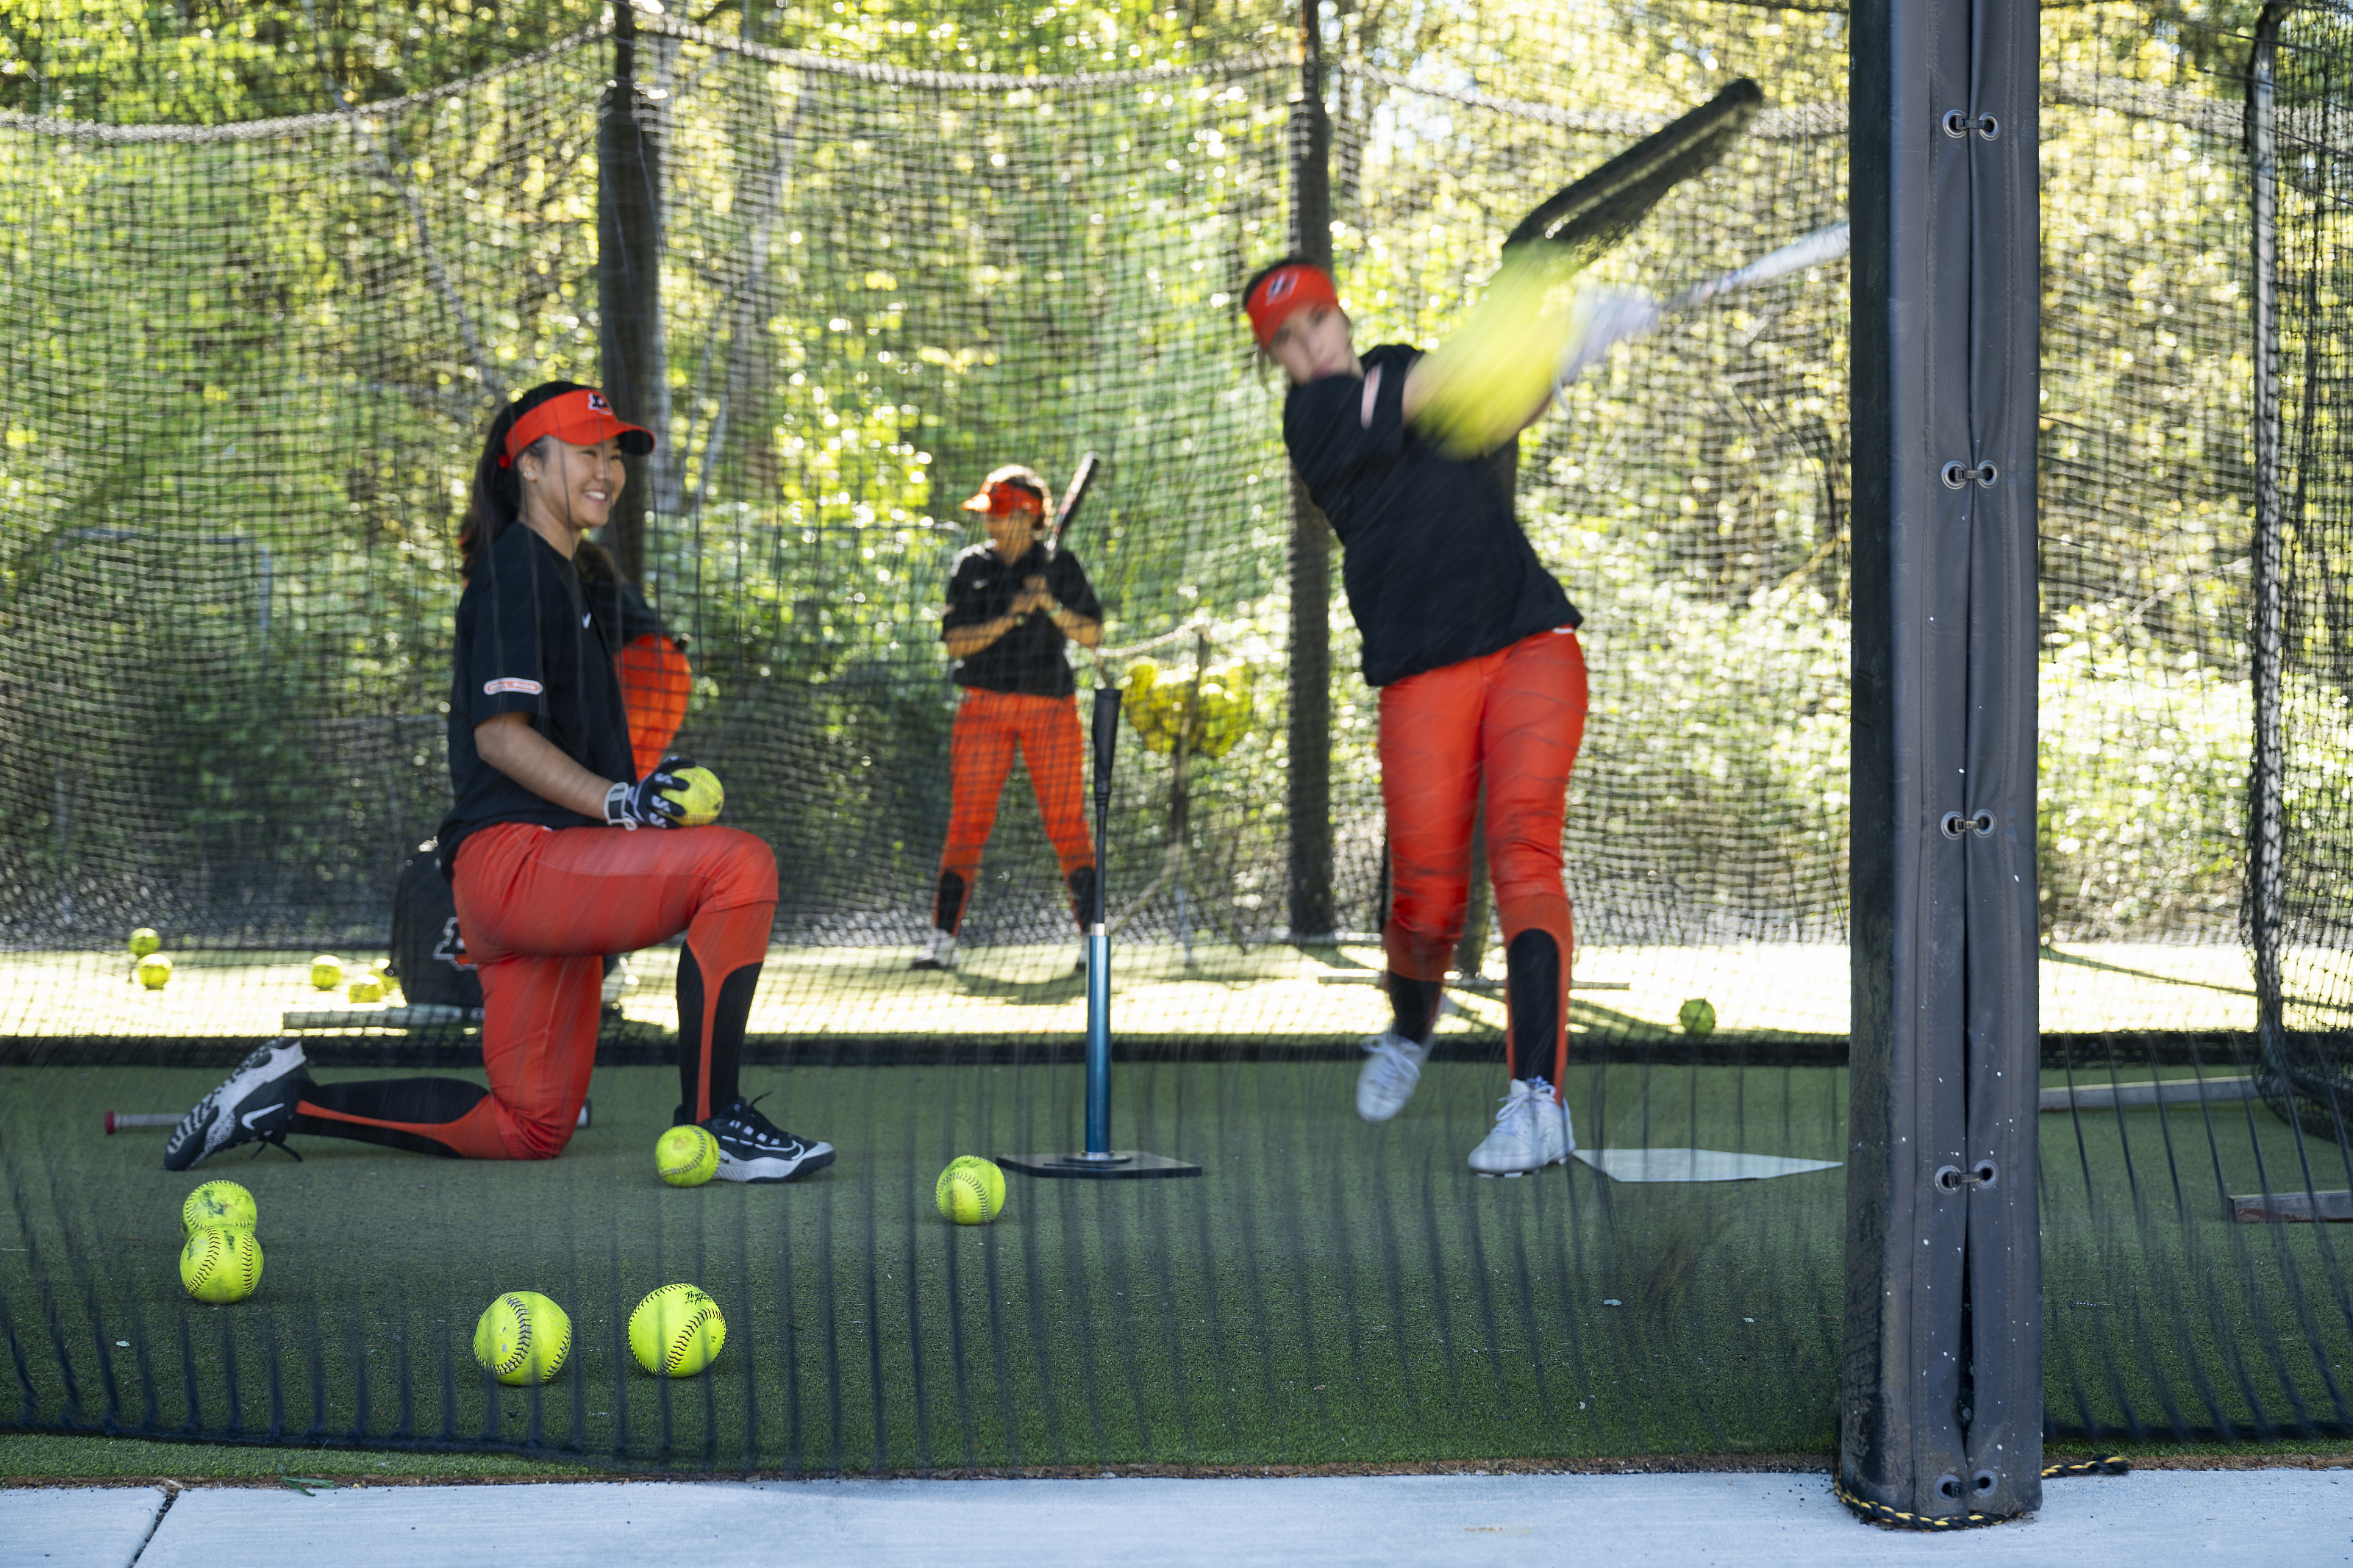 A softball player hitting a ball in a batting cage, while another player kneels nearby with a ball in her hand.